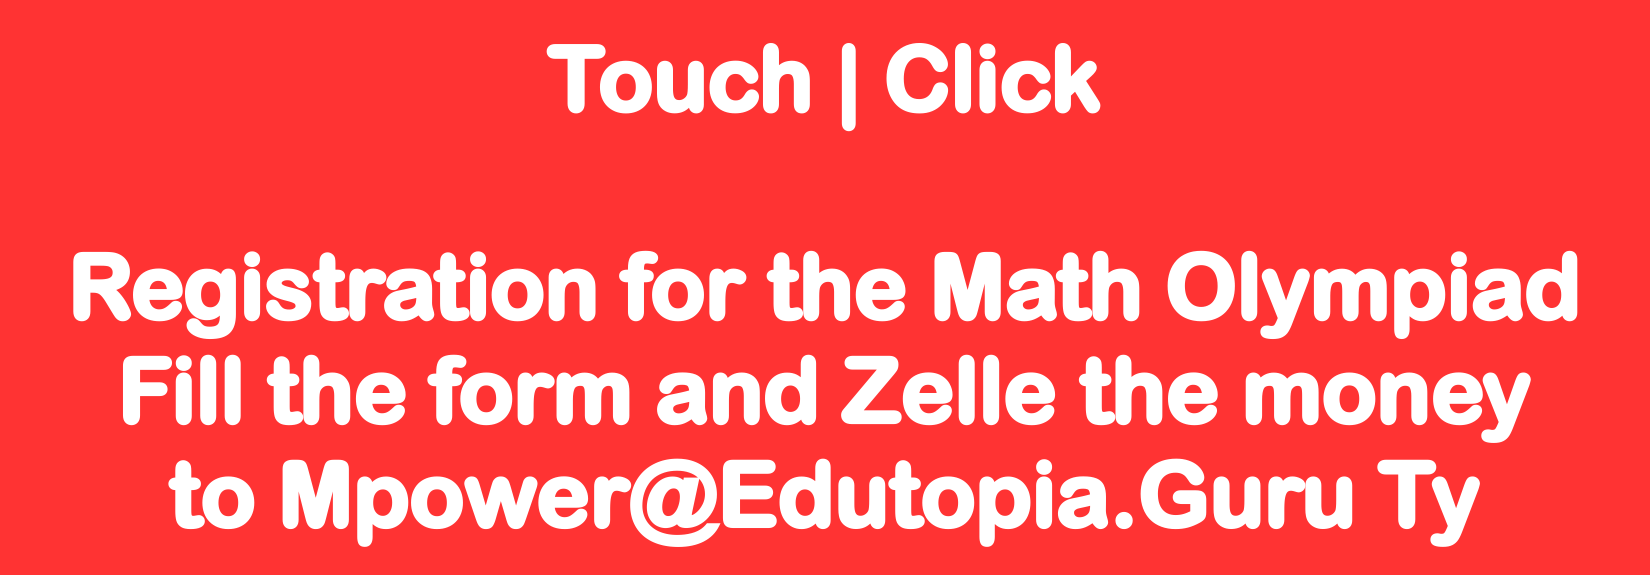 Registration Form for Math Olympiad _ Fill and Zelle to Mpower@Edutopia.Guru